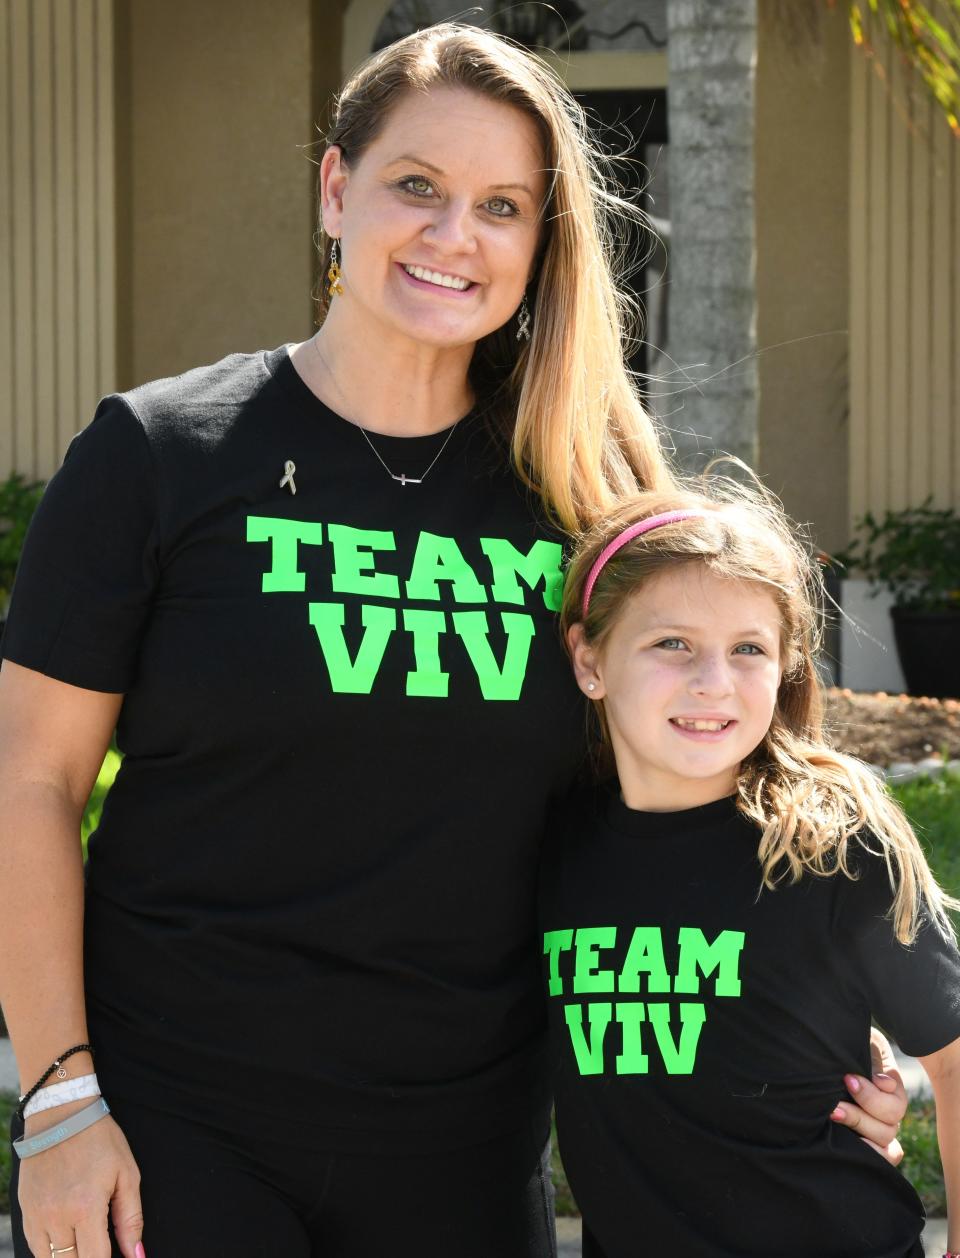 Brittany Sleeth and her 7-year-old daughter Viv pose for a photo before shaving their heads Sunday afternoon in their Rockledge driveway.